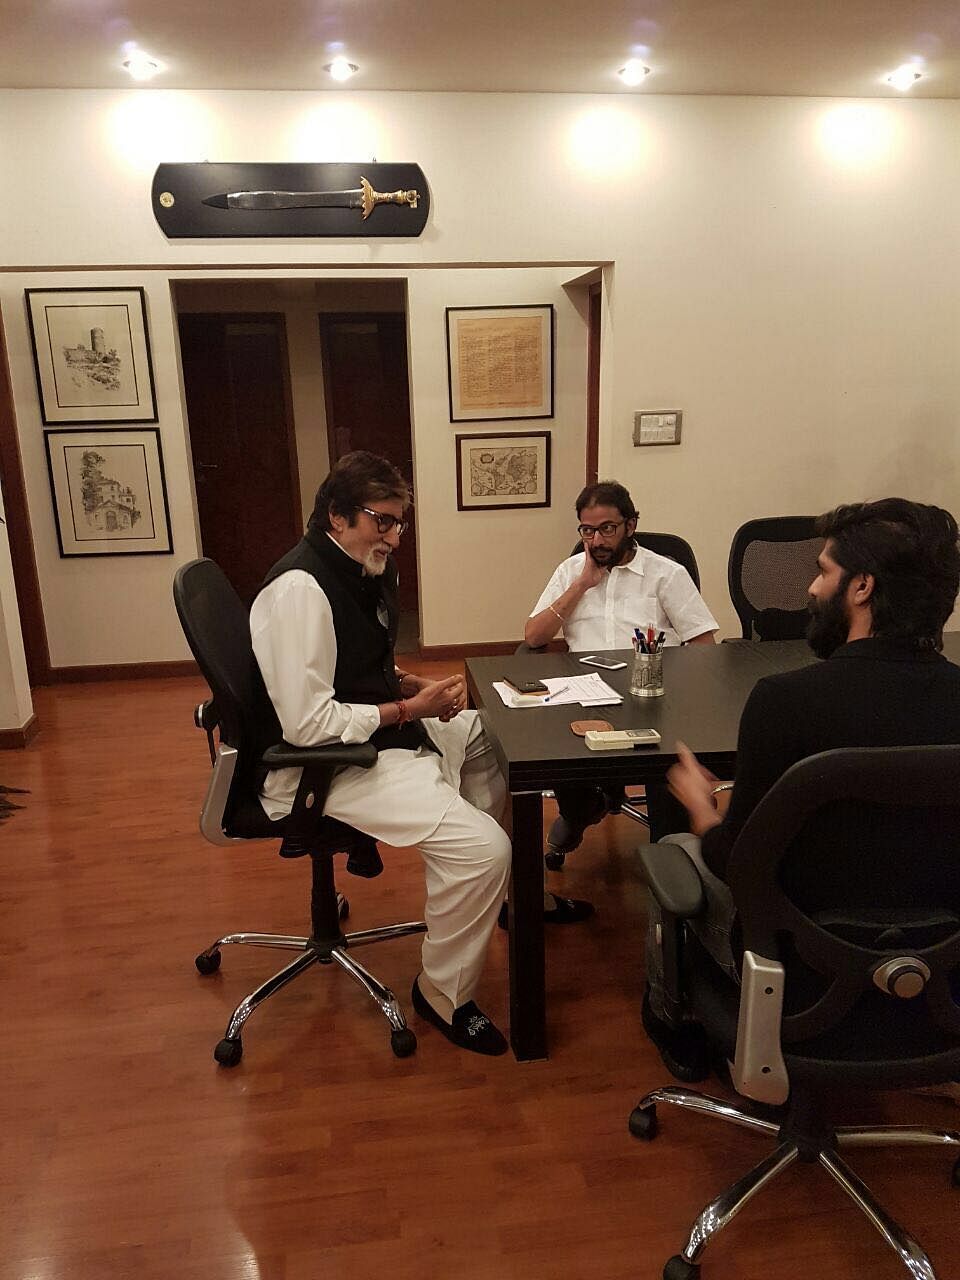 Amitabh Bachchan chooses to meet an MNS leader, who has threatened to ban a film starring Pakistani actor Fawad Khan